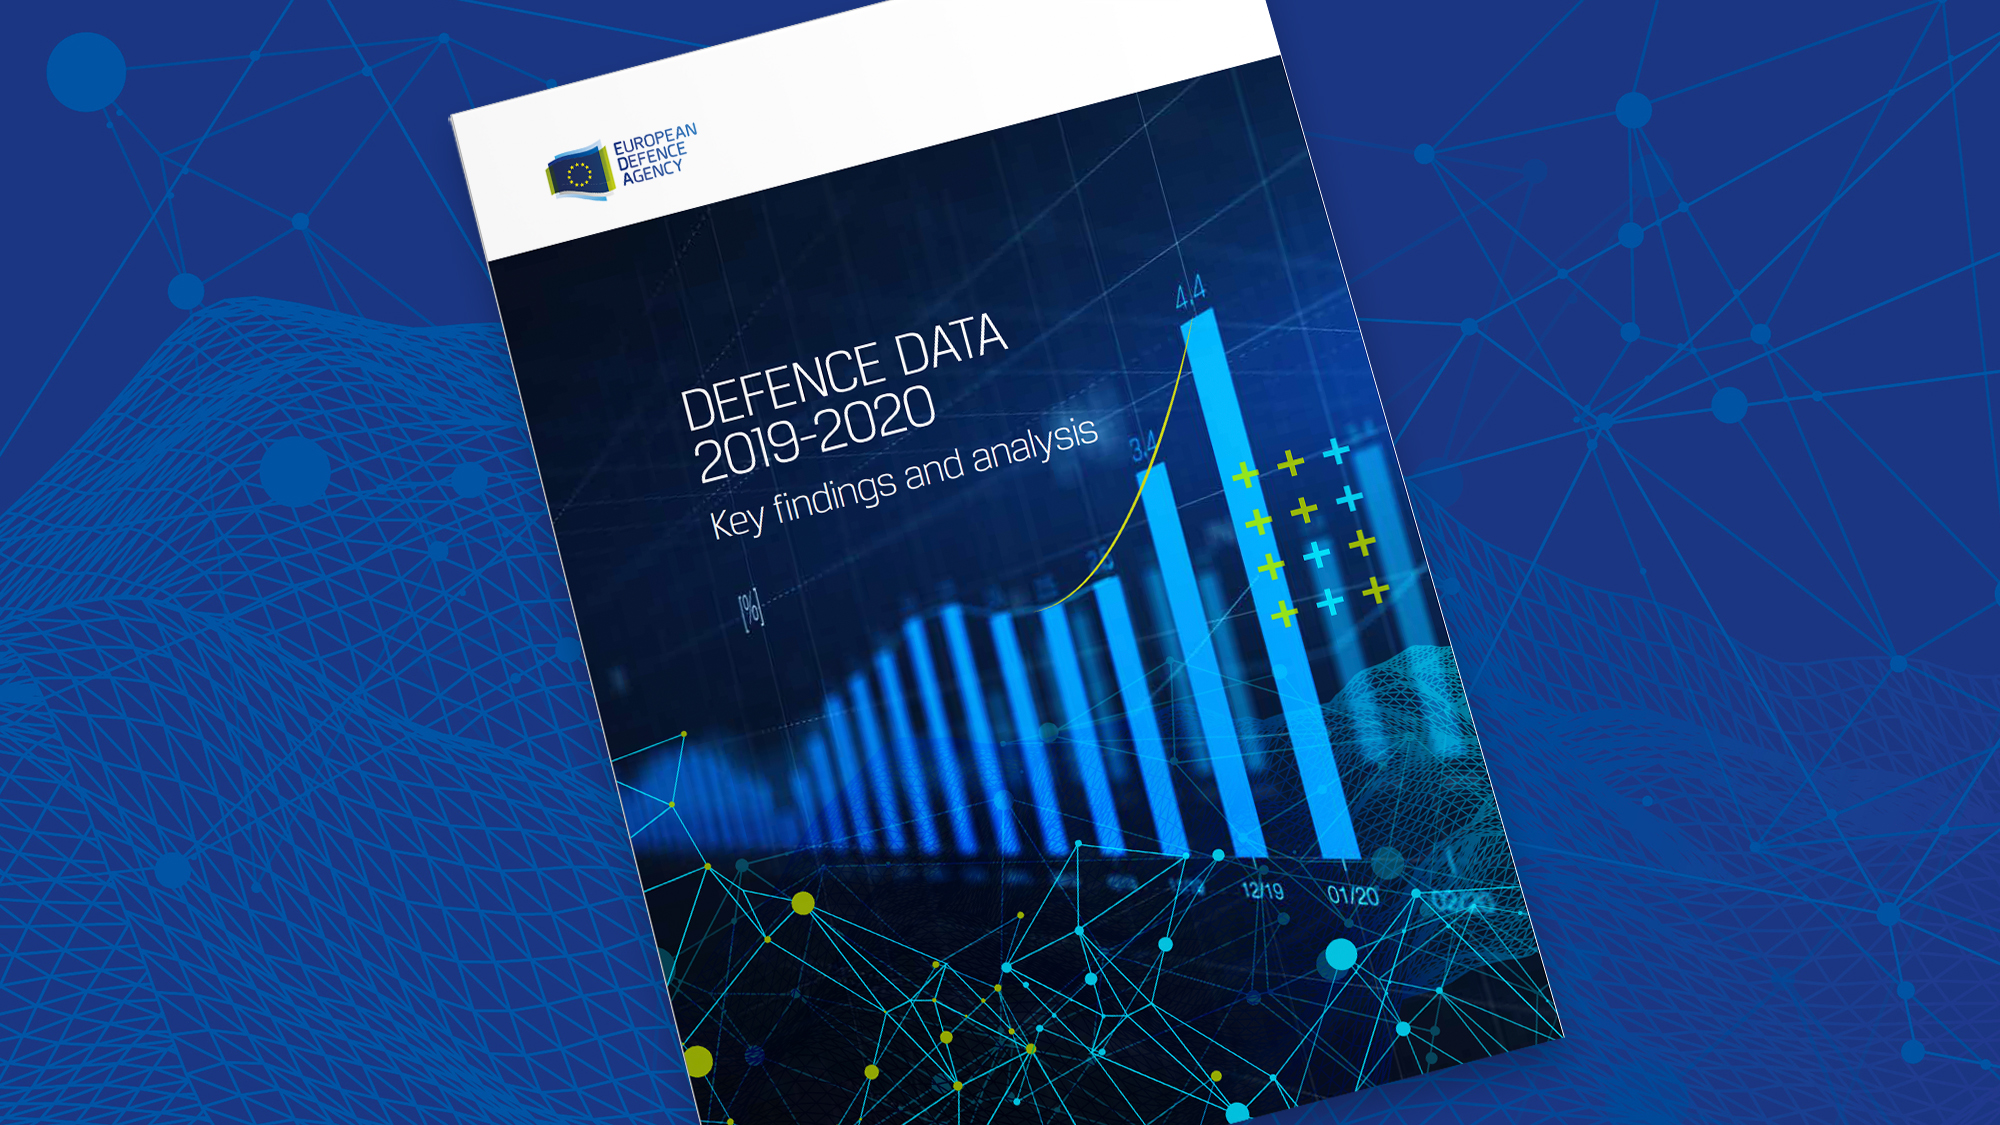 EDA finds record European defence spending in 2020 with slump in collaborative expenditure